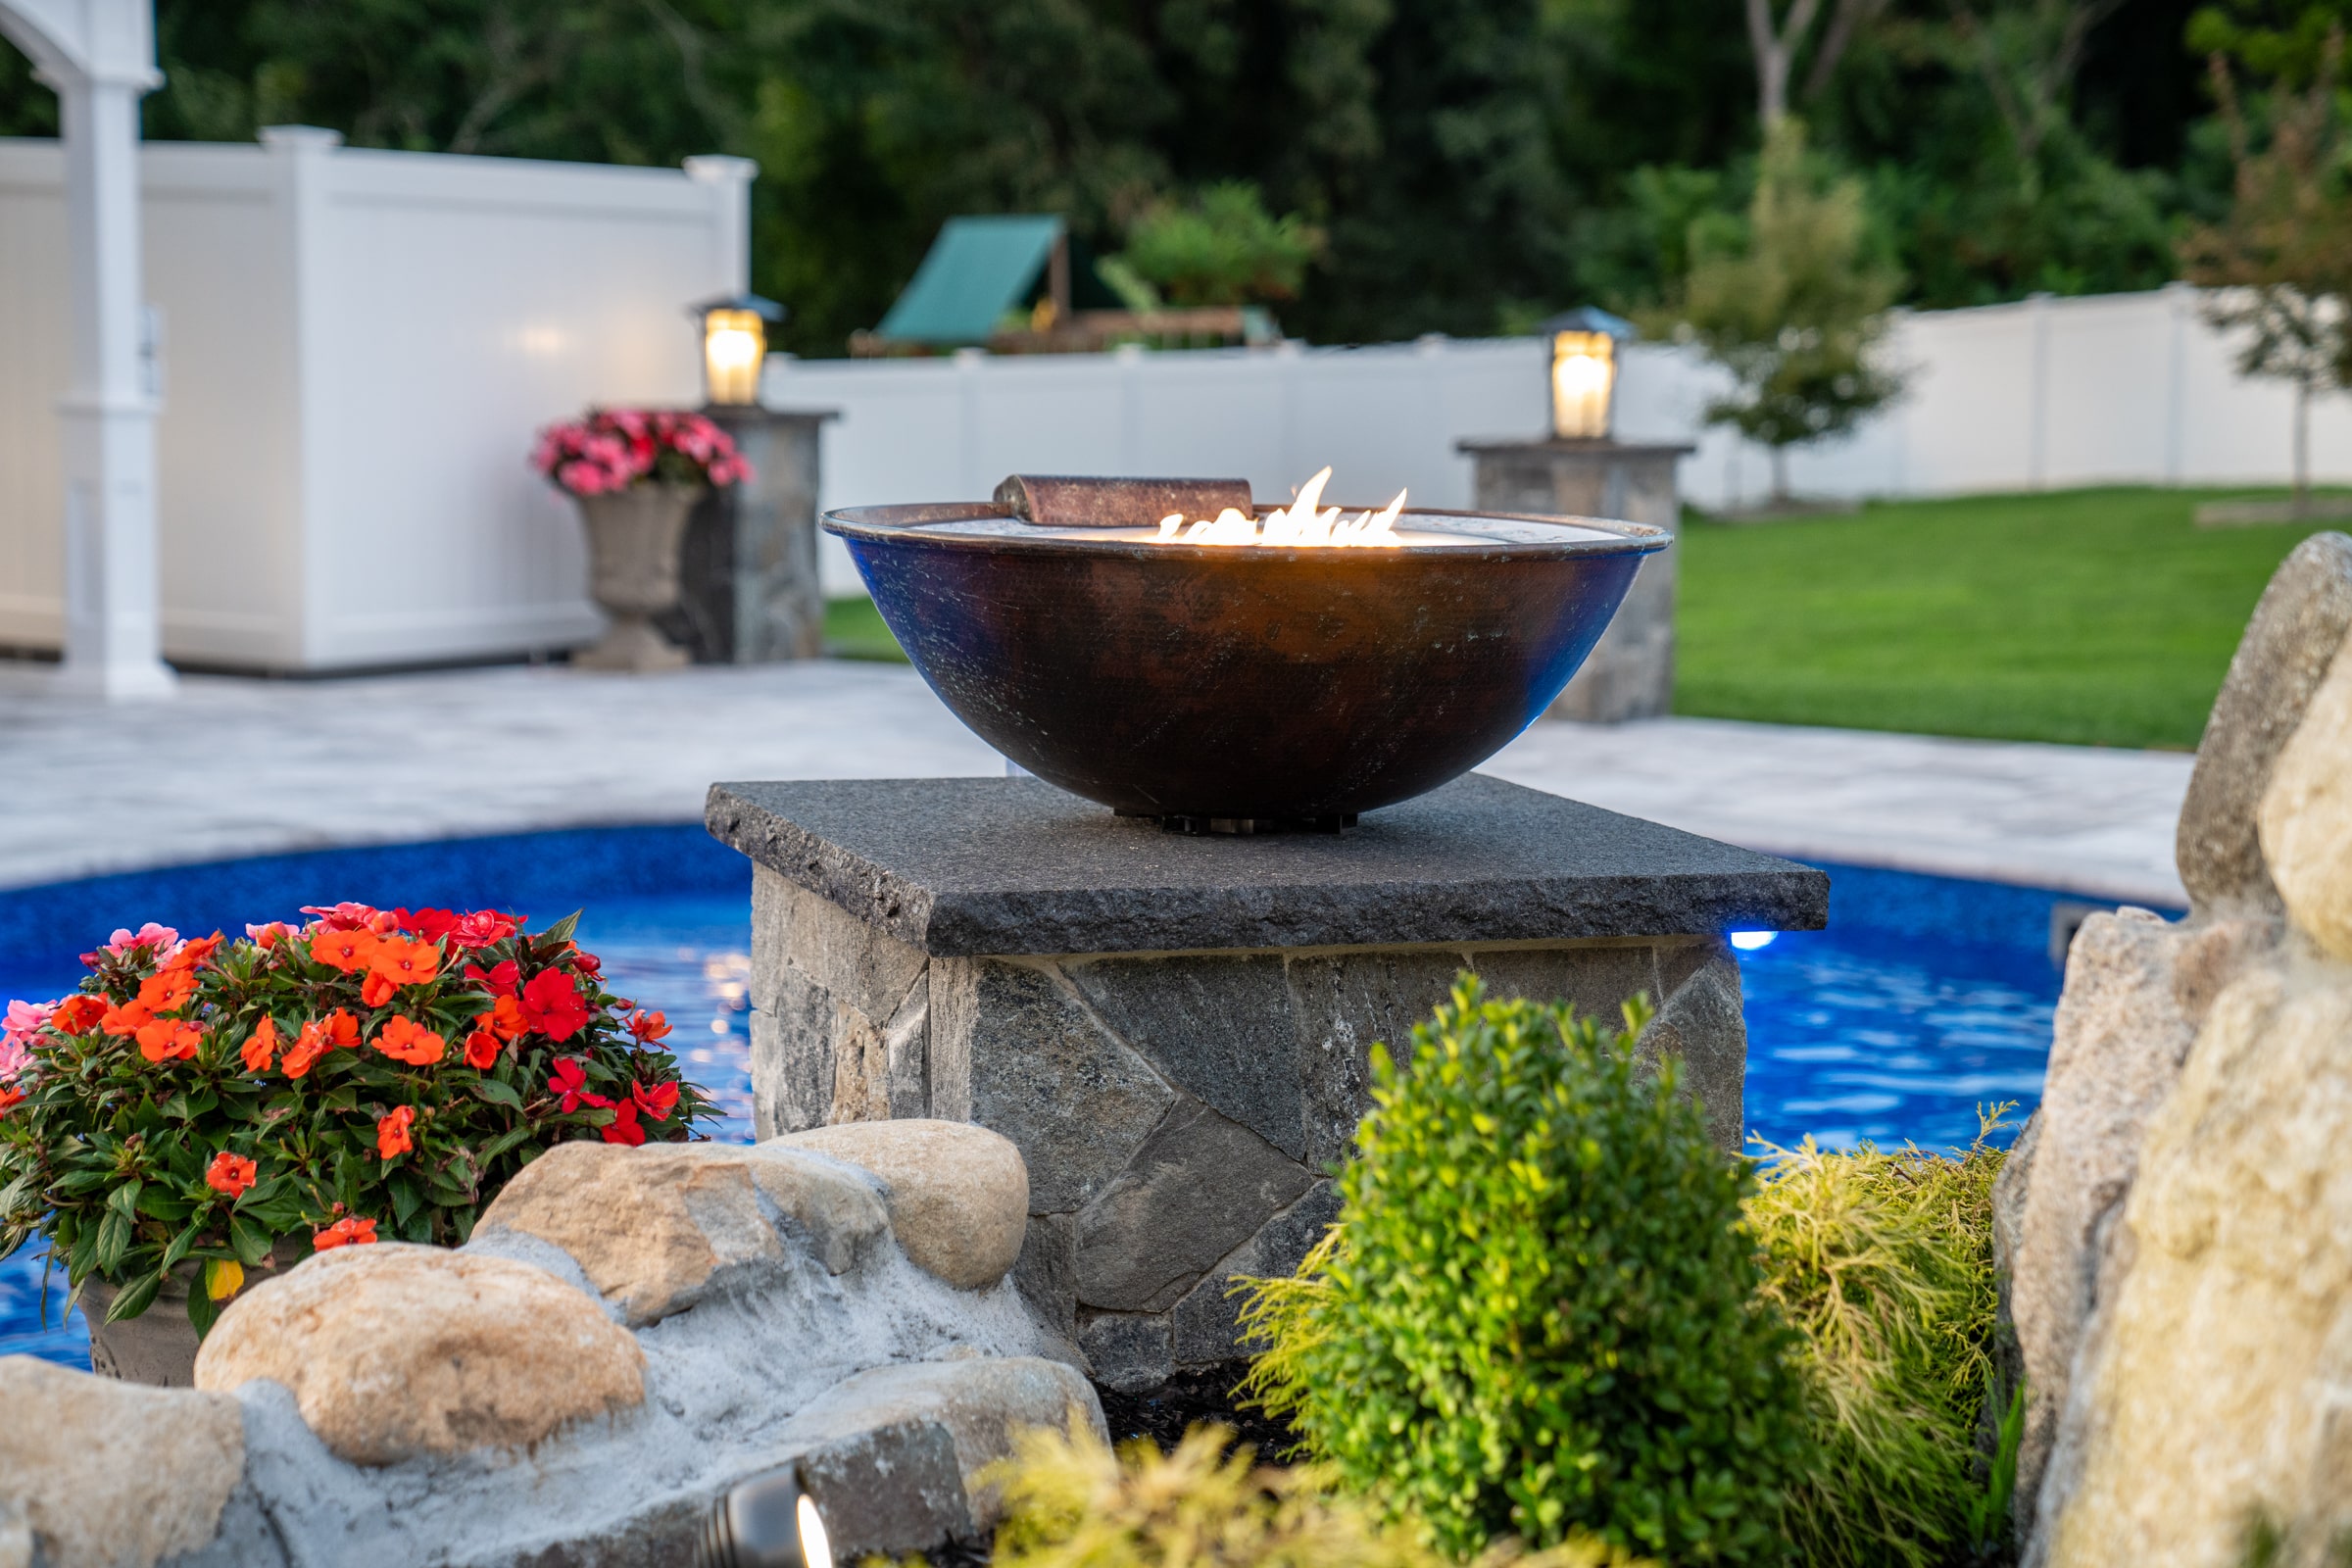 Dex by Terra installed this water and fire feature has been installed next to the pool, enhancing this backyard in Grafton, Massachusetts.